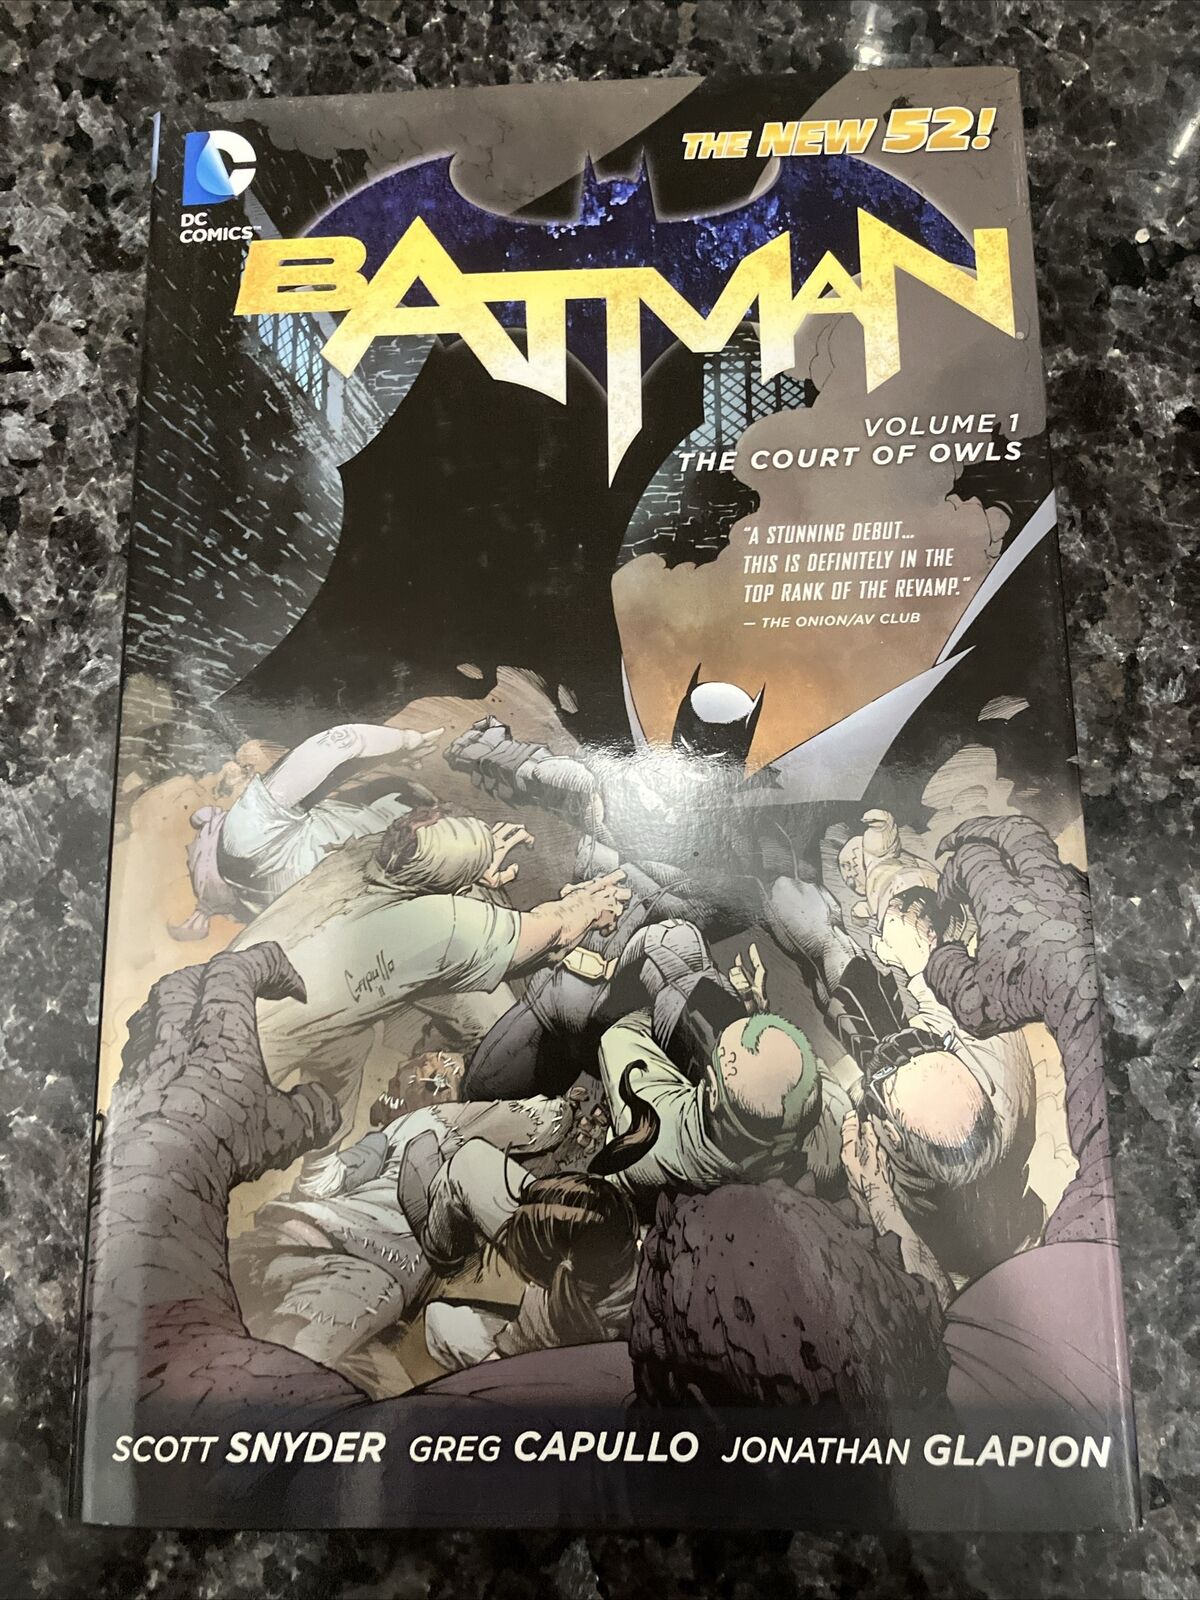 Batman Vol. 1: the Court of Owls the New 52 Hardcover Scott Snyde